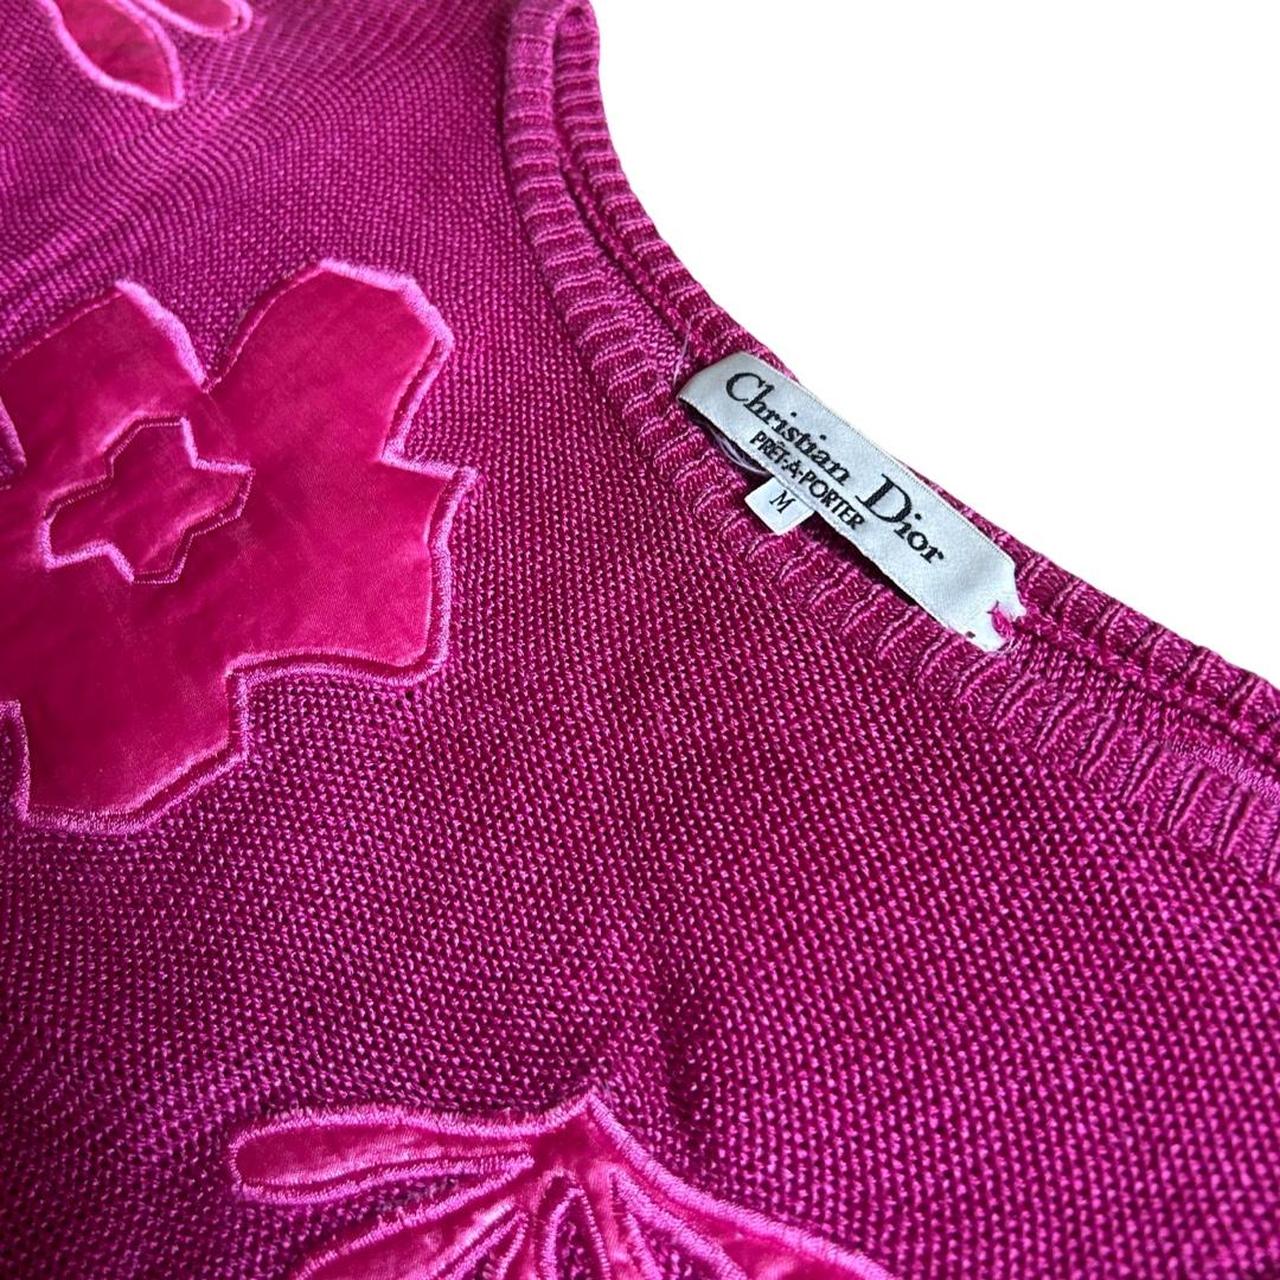 Christian Dior knitted sweater - Pret A Porter...